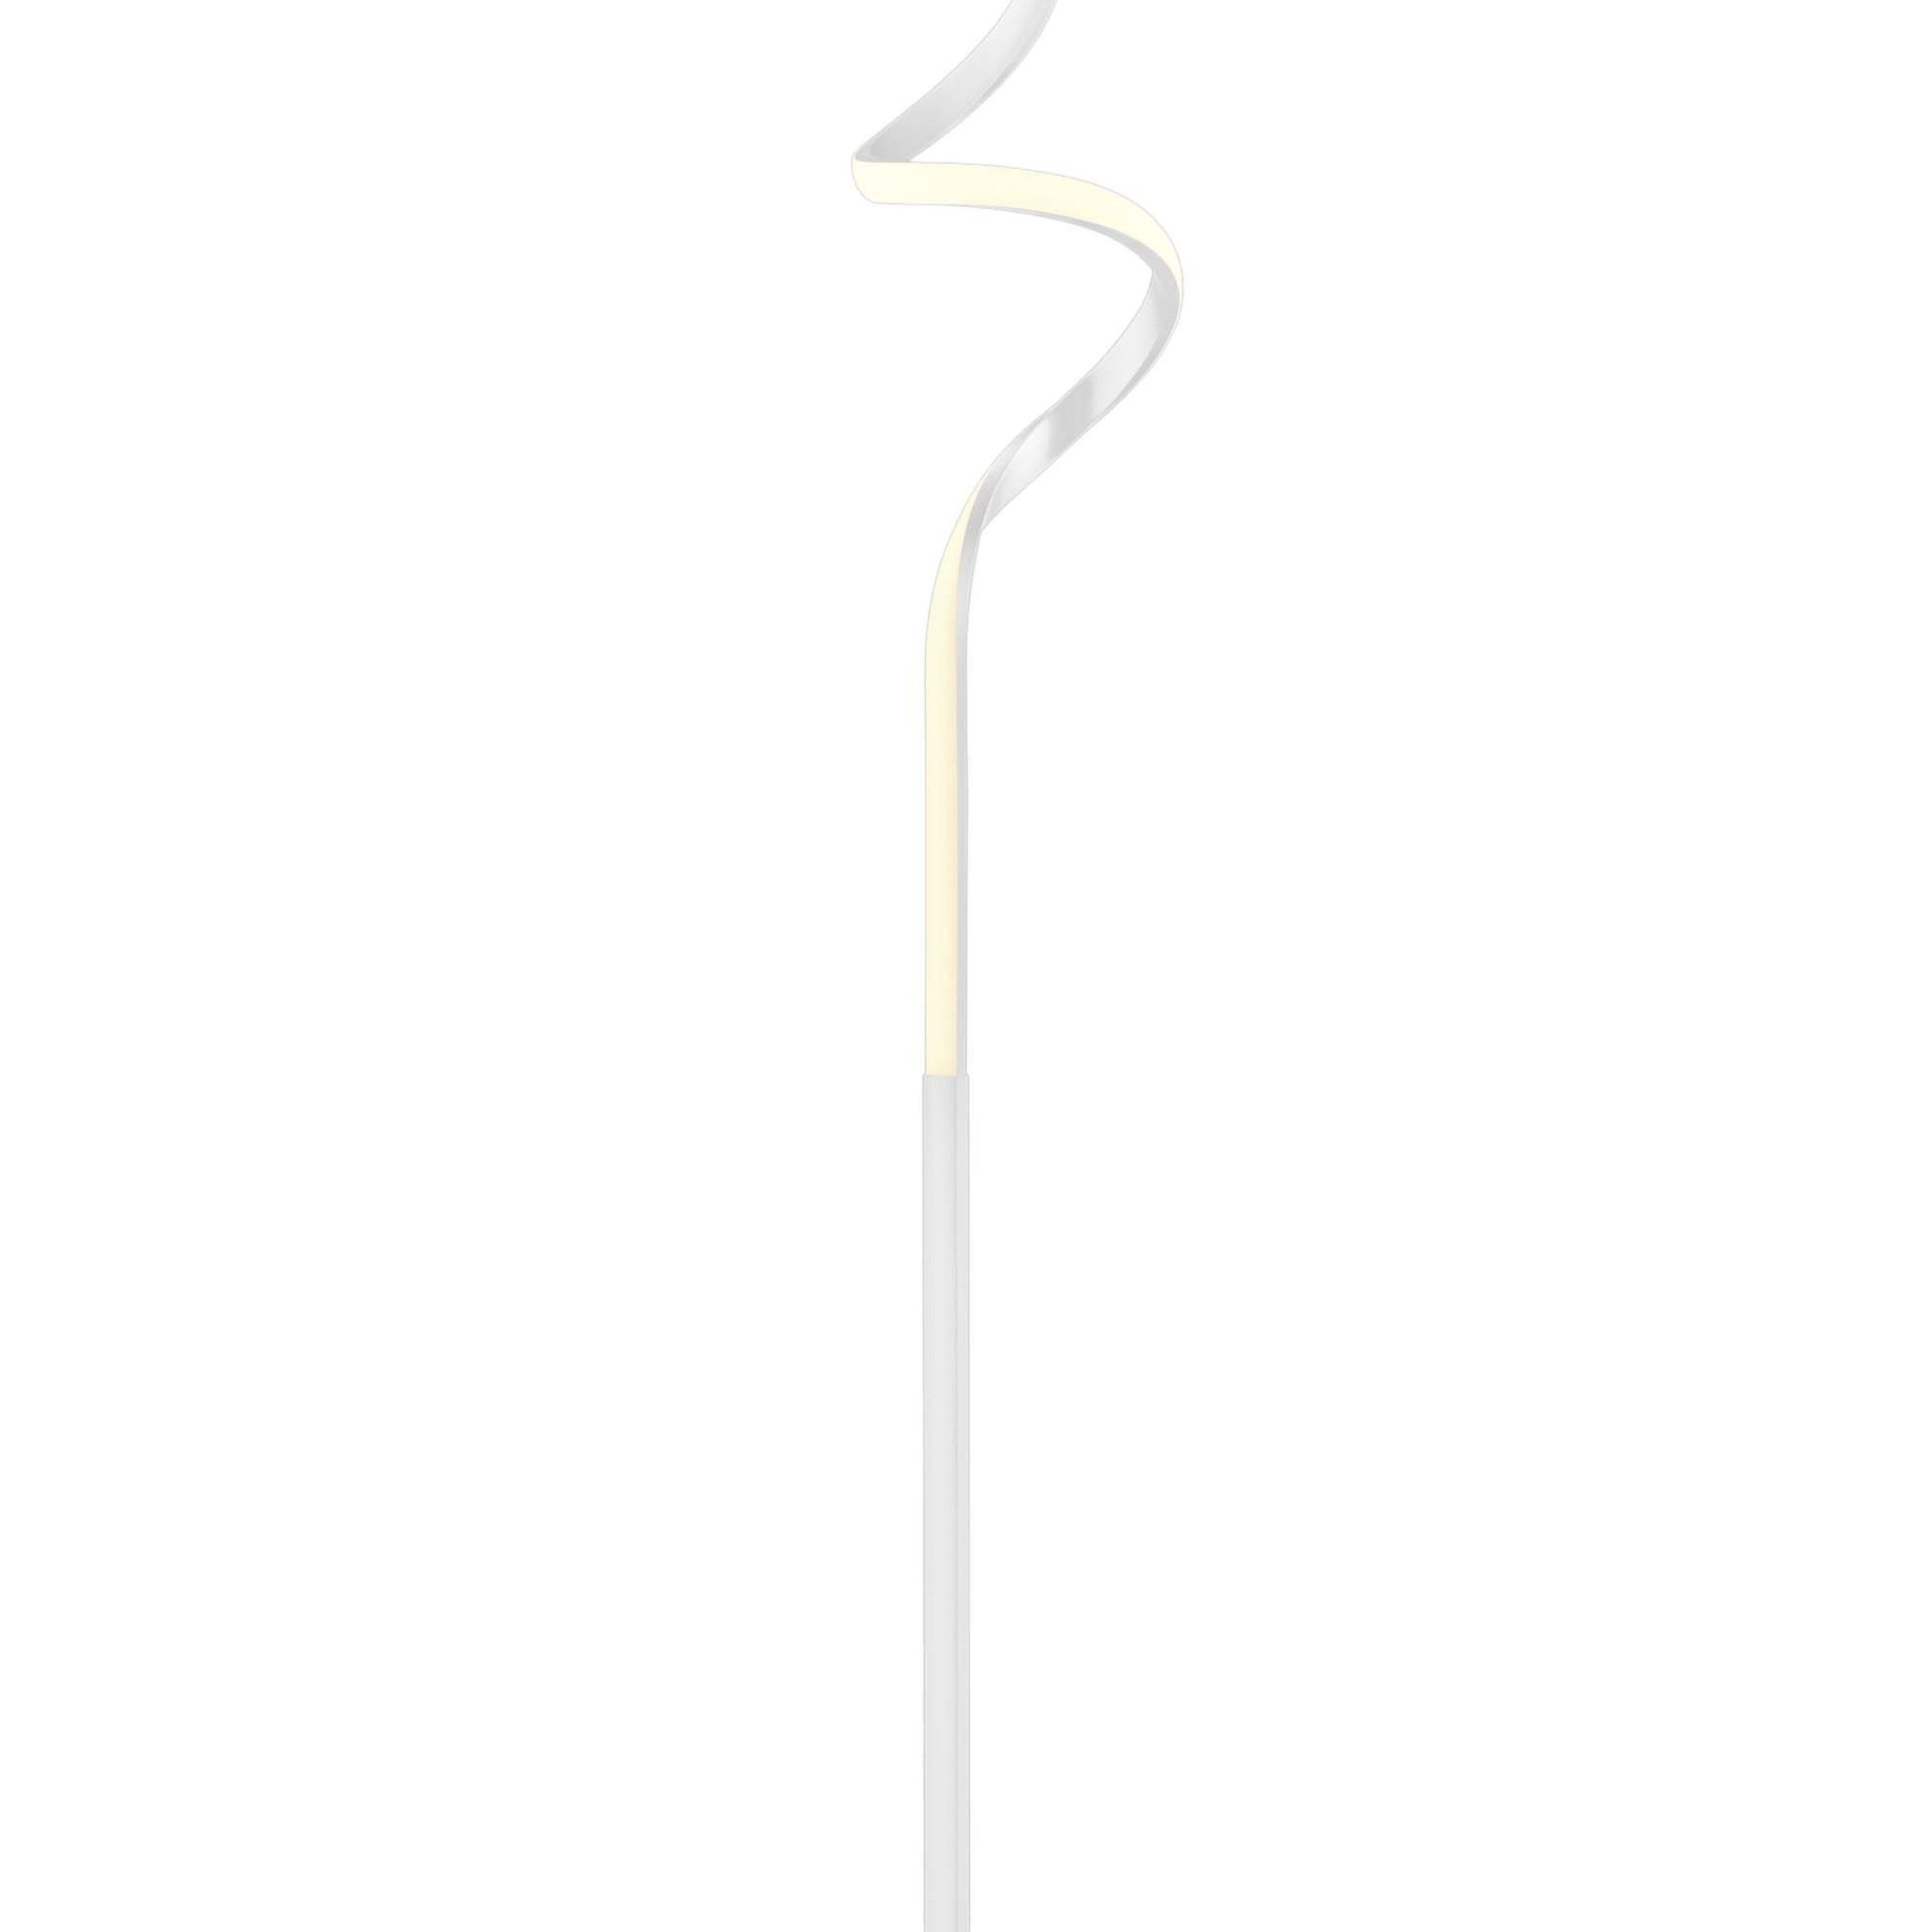 Fashionable Modern Design White Trio Led Floor Lamp Tr005 Pertaining To Acrylic Floor Lamps (View 14 of 15)